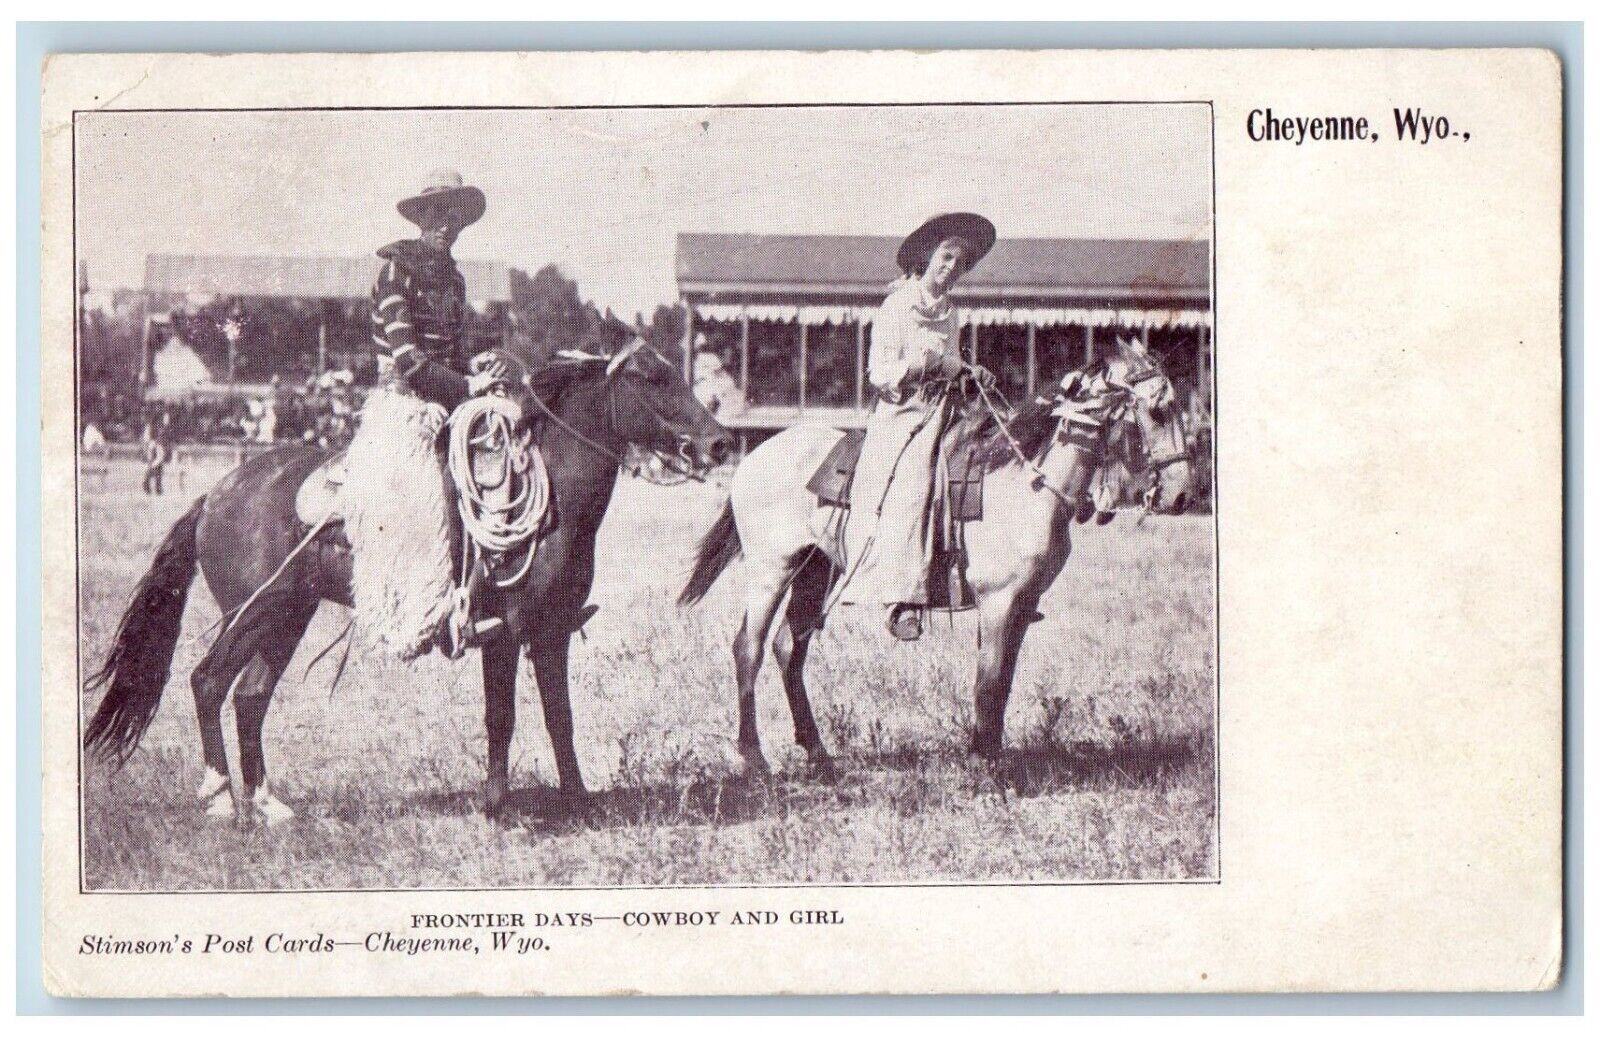 Cheyenne Wyoming WY Postcard Frontier Days Cowboy And Girl Cowgirl c1905 Antique